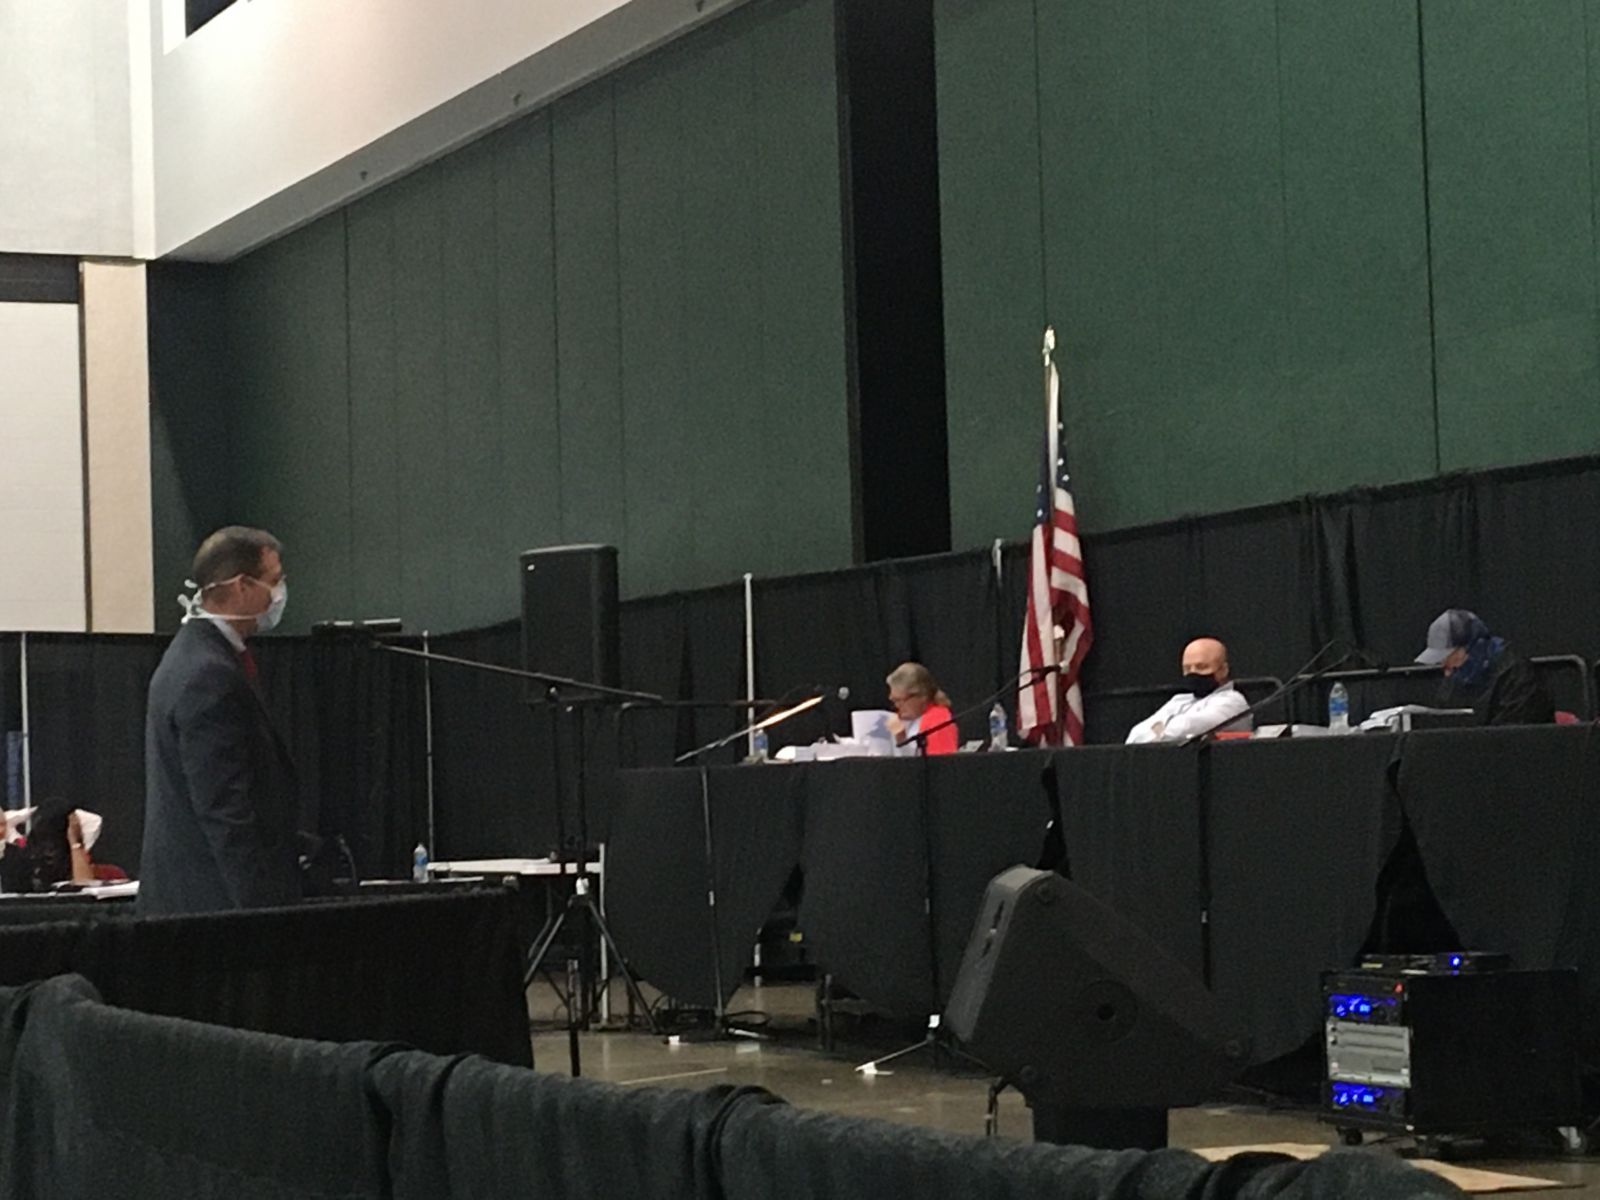 Representatives from AnMed Health presented a report on the rise of COVID-19 cases in the county during a presentation on a countywide mask ordinance. The ordinance did not have enough support for a vote. (Photo/Molly Hulsey)